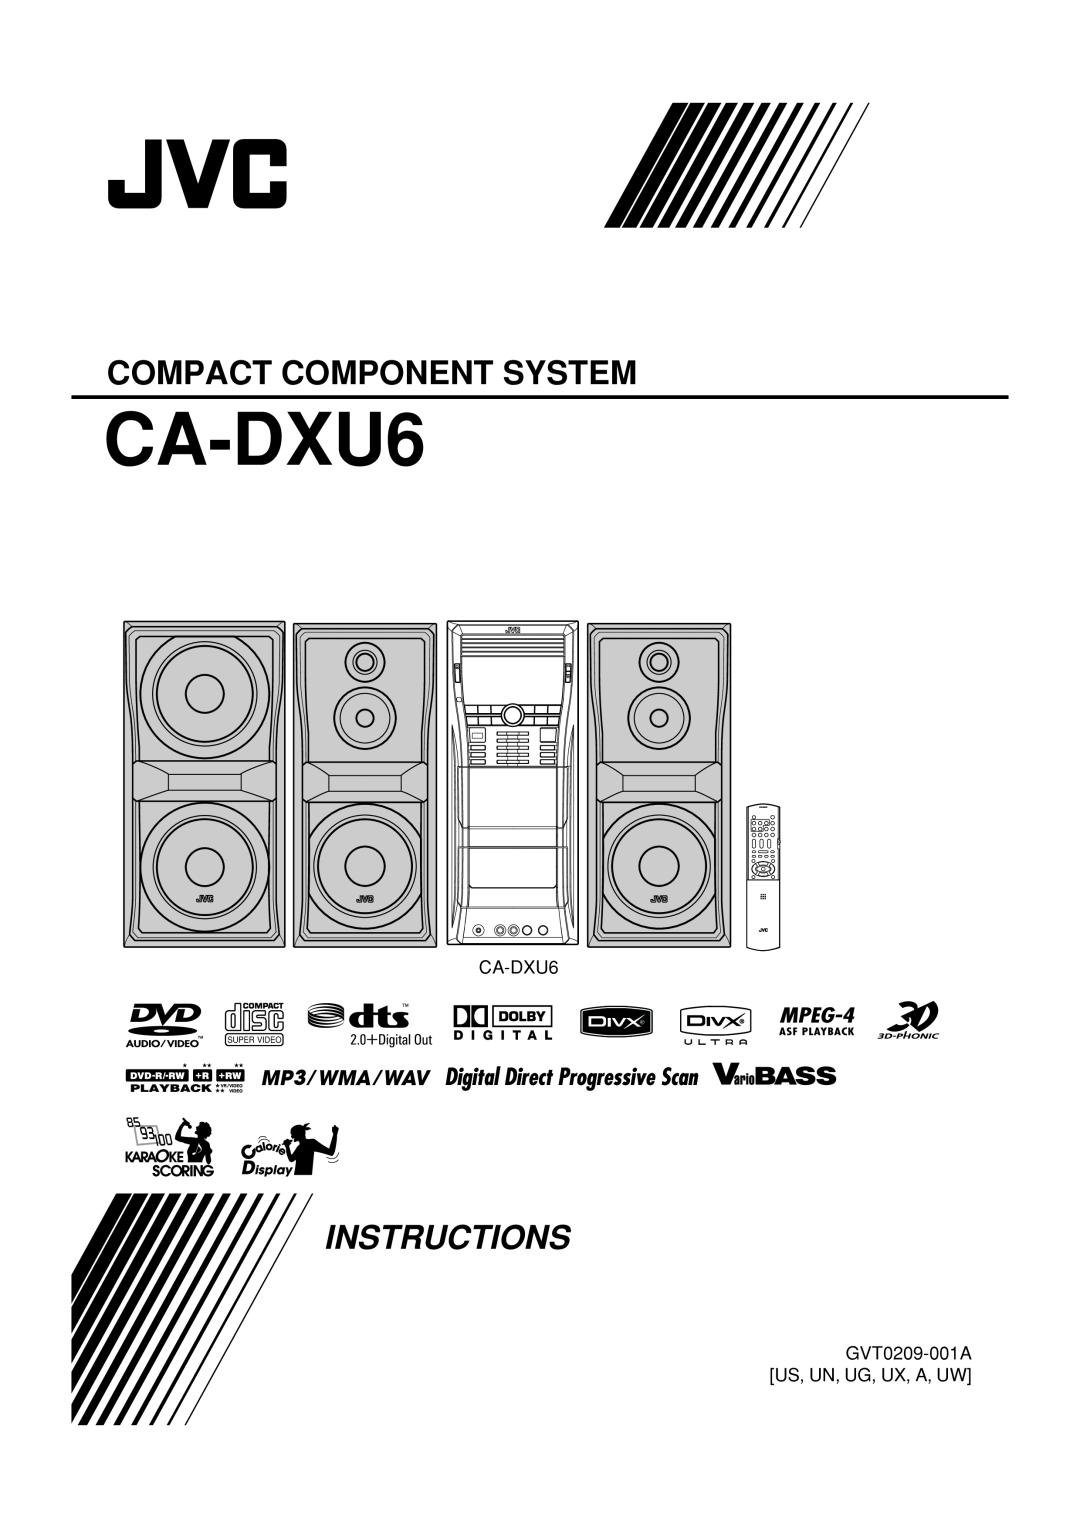 JVC CA-DXU8, CA-DXU10 CA-DXU6, GVT0209-001A US, UN, UG, UX, A, UW, Compact Component System, Instructions, Super Video 